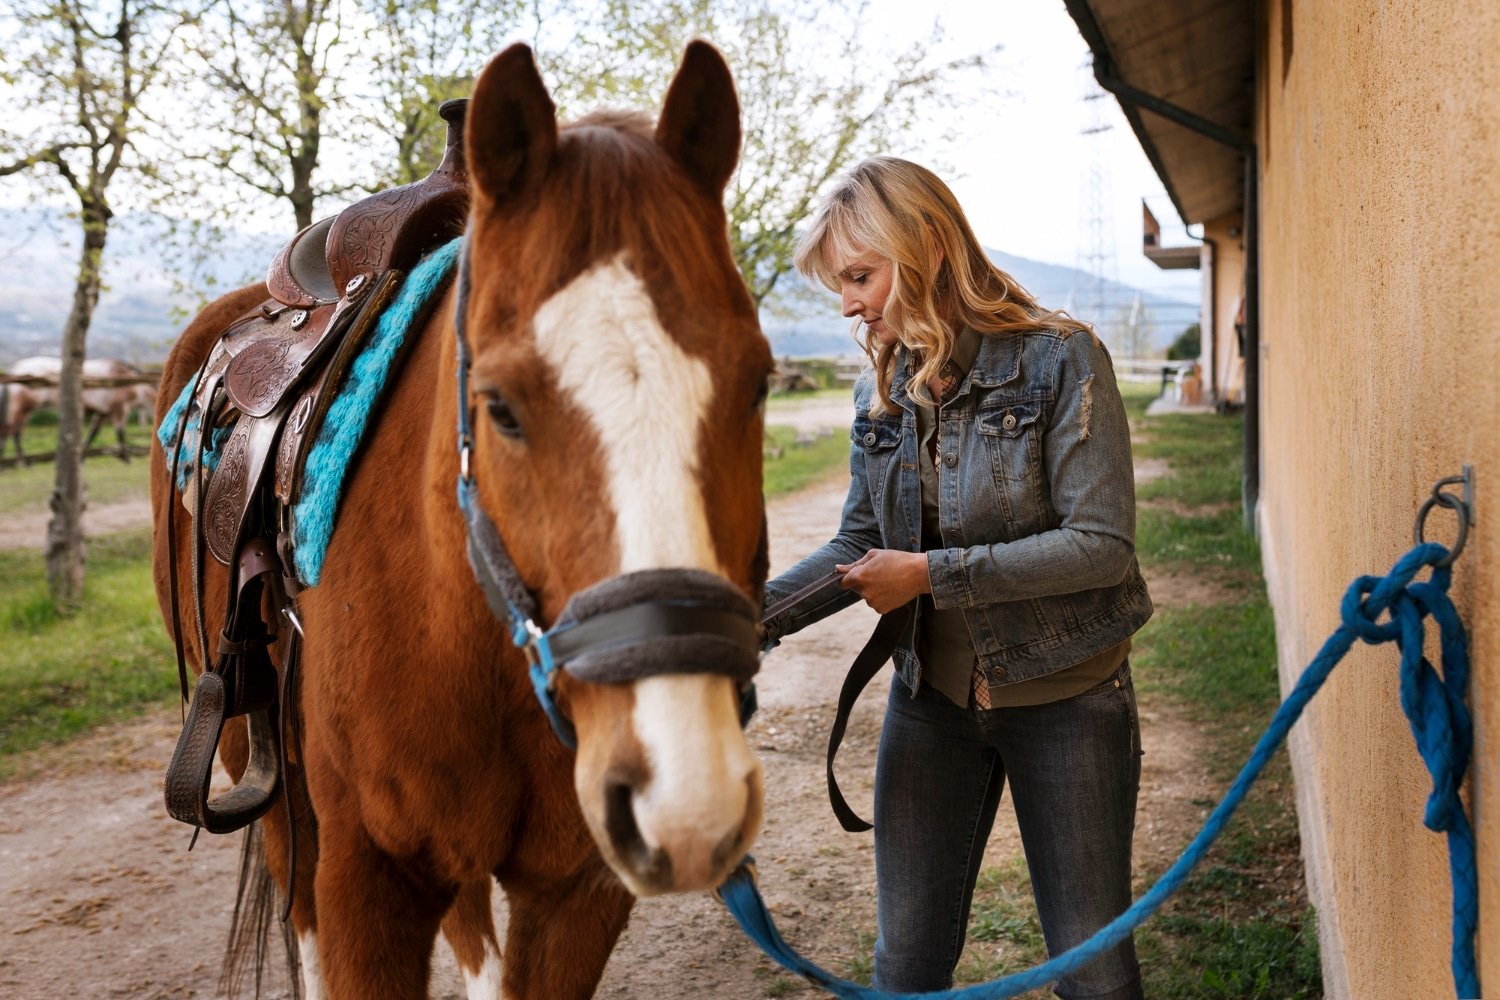 Read more about the article Care For Your Equine Friends With Horse.com’s Comprehensive Supplies